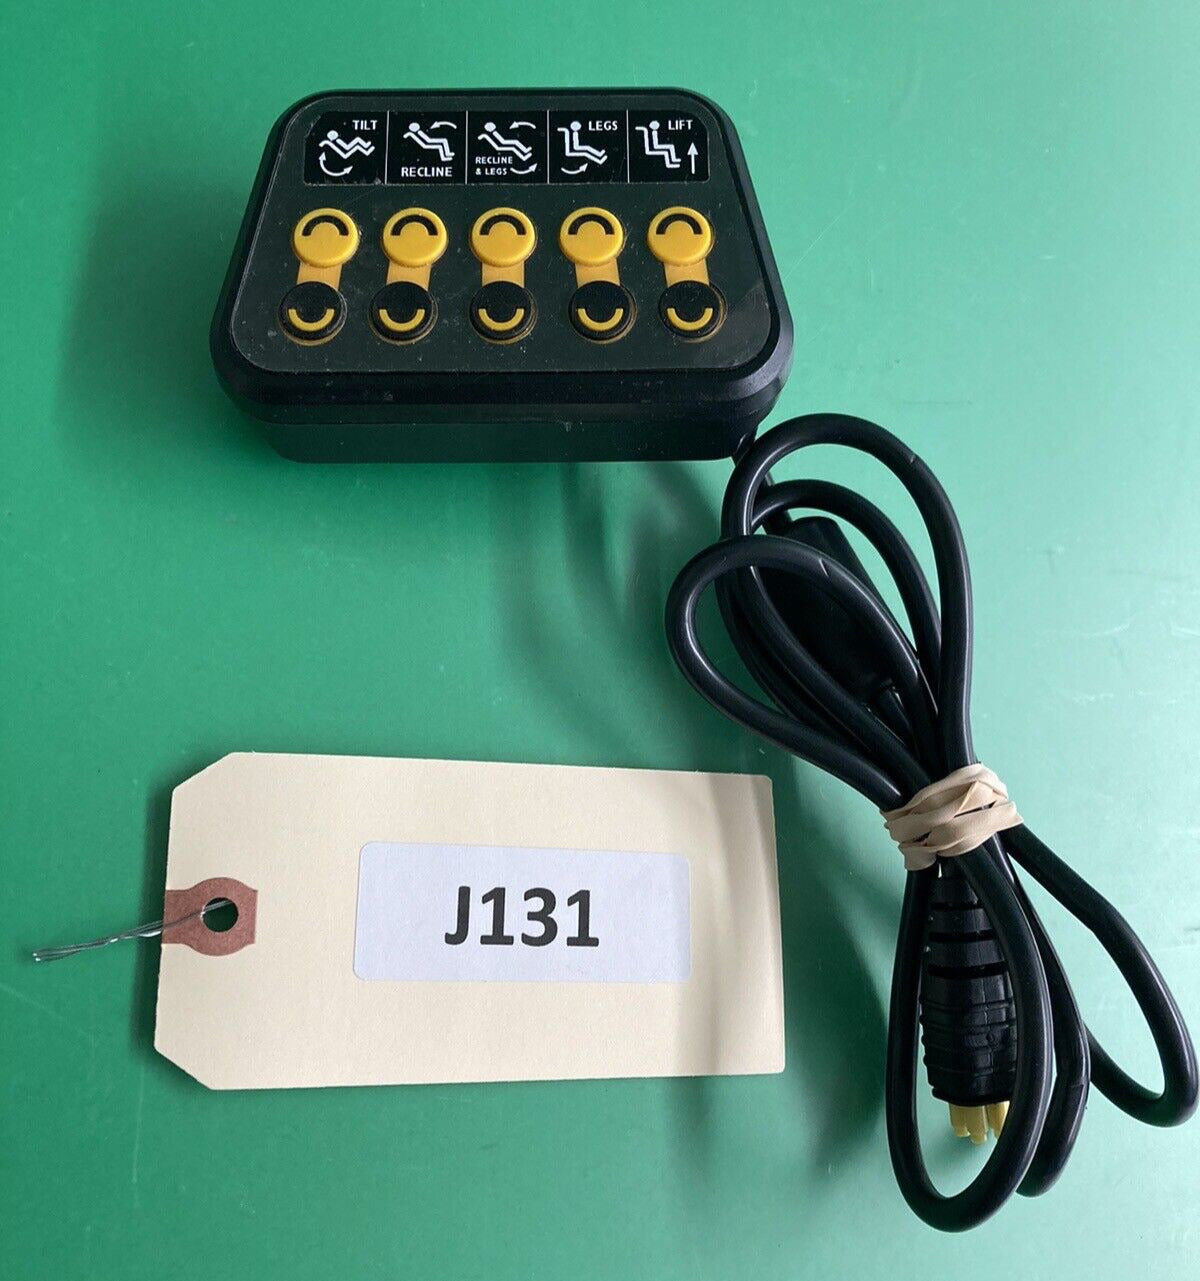 Quickie Control Plus 5 Toggle Function Switchbox w/ USB CHARGER* 130913 #J131